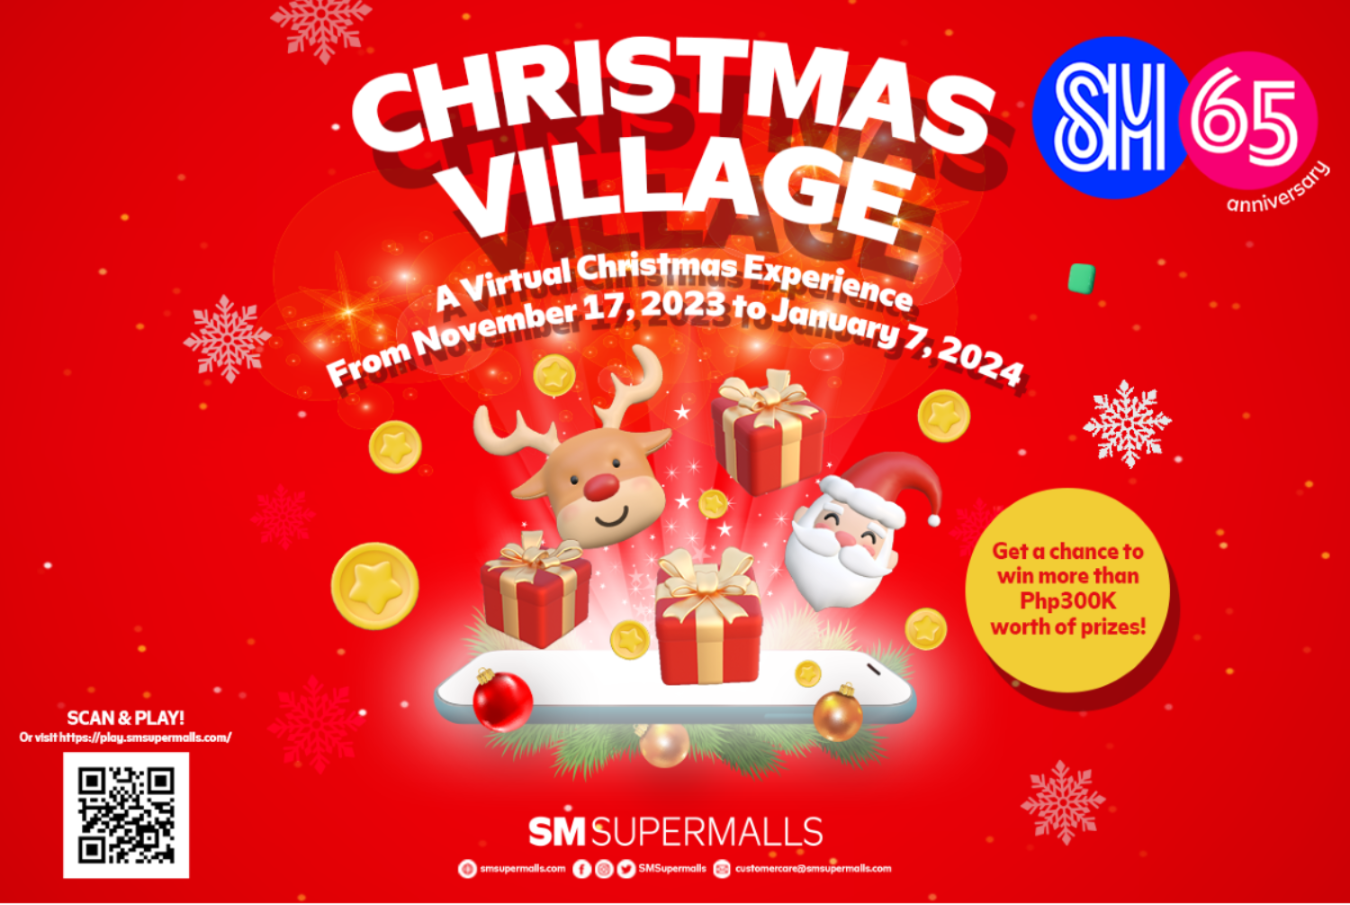 Have The Happiest Christmas Ever At The SM Christmas Village!